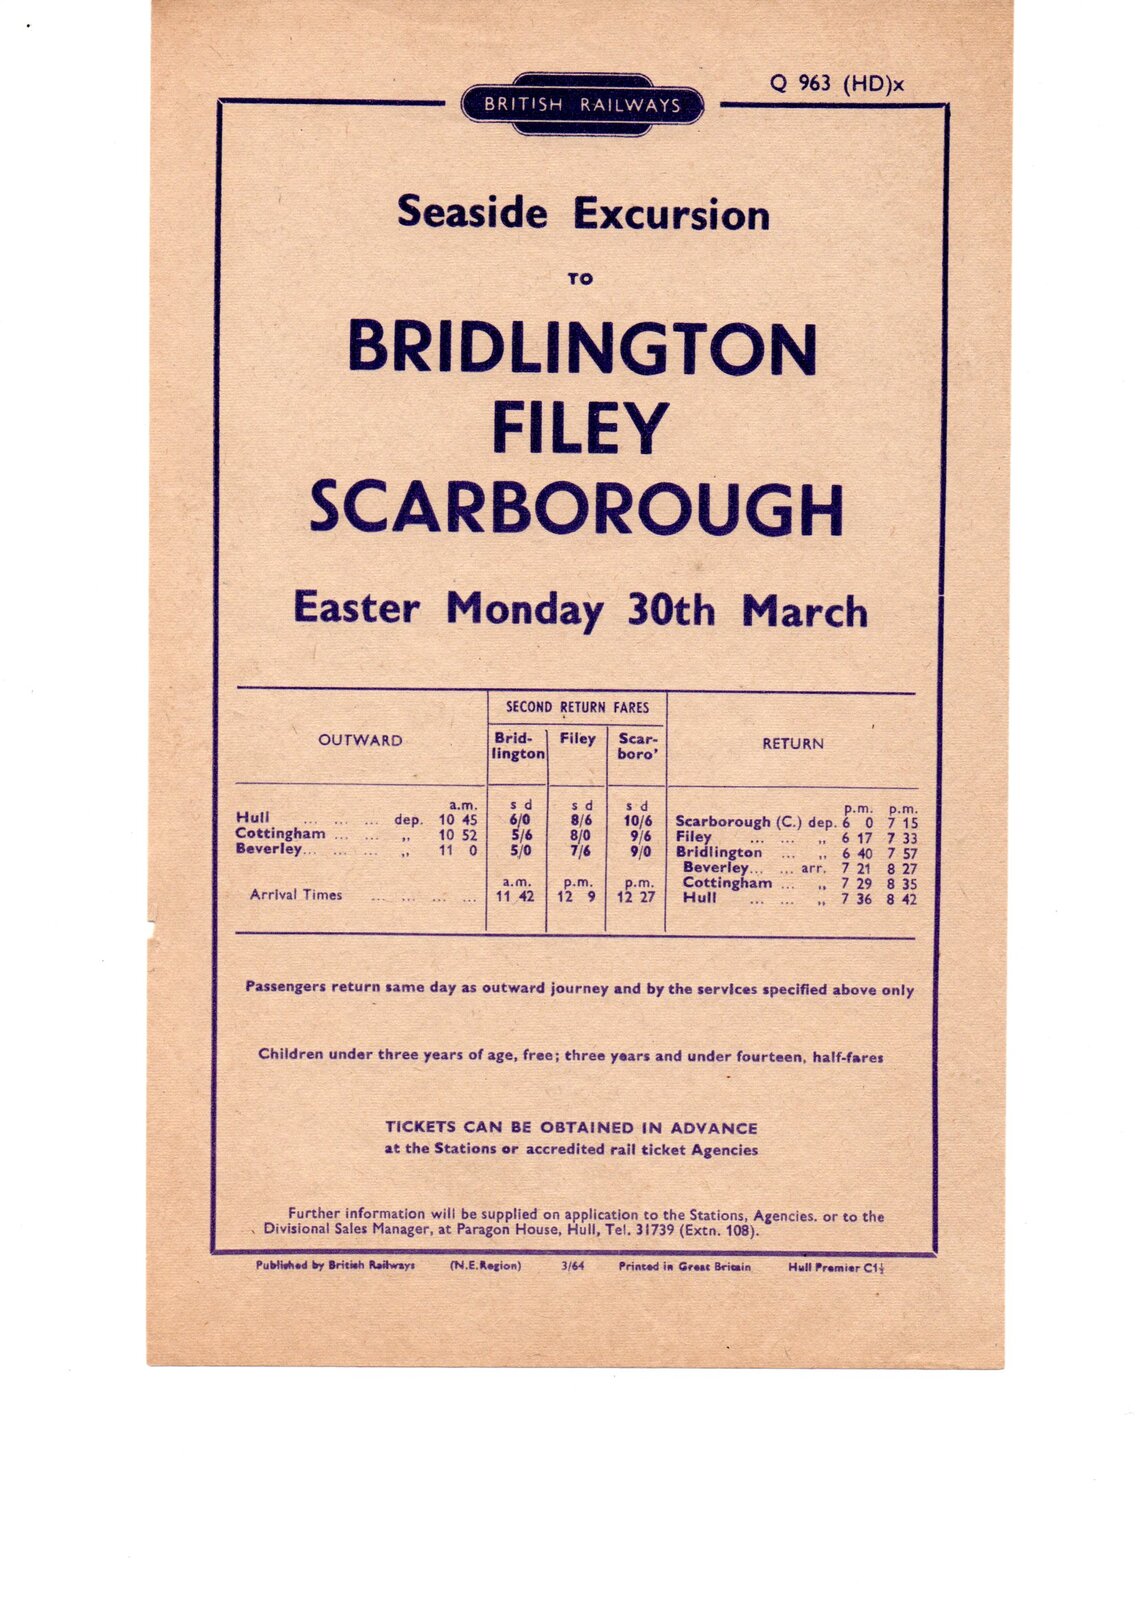 Hull to Bridlington Excursion Easter 1964 